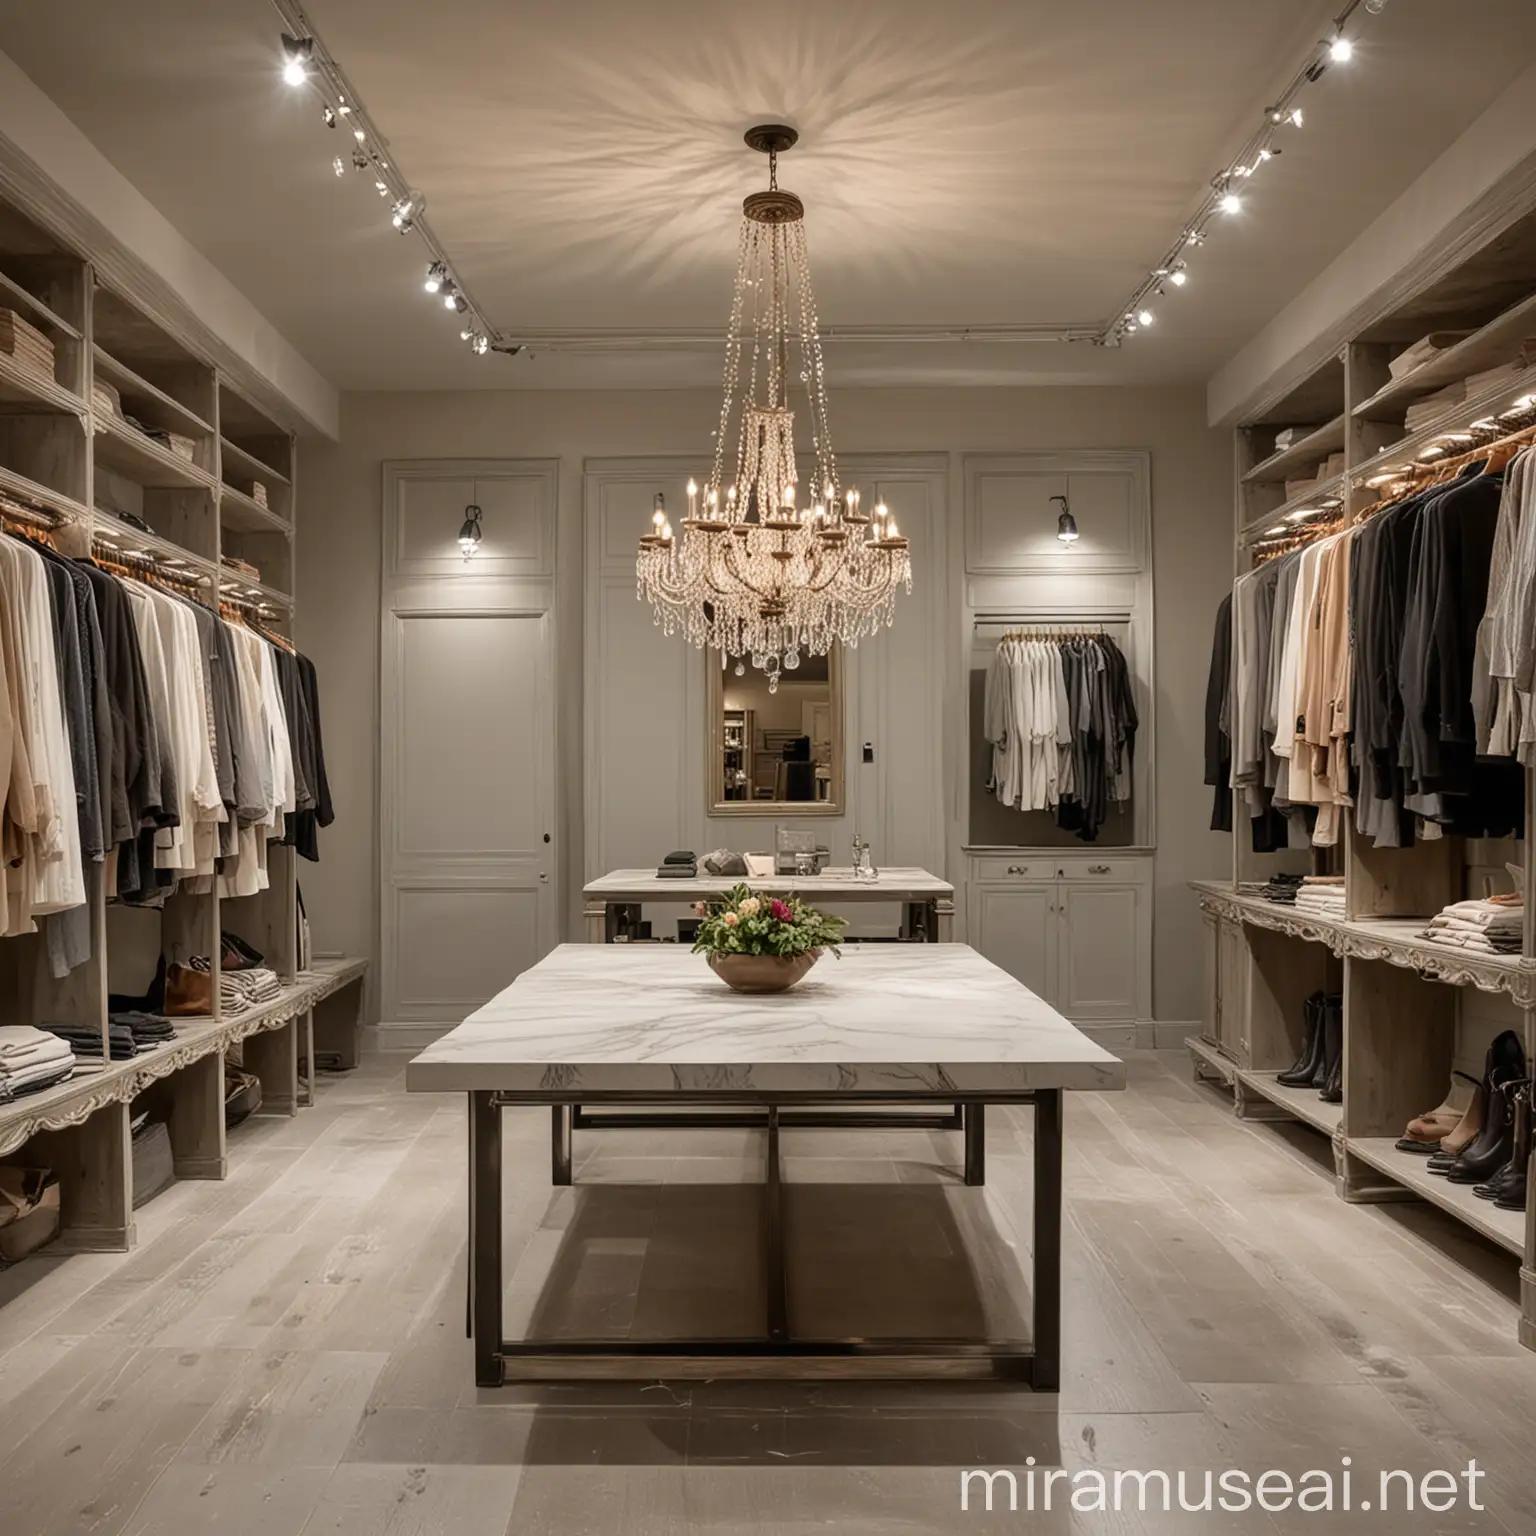 Create a new look for a boutique of elegant clothing, using warm tones and a MODERN, linear, yet unique style. The first part of the space, up to the table, has a drop ceiling, while beyond the table there is a vaulted ceiling with exposed stone. Redesign all the lighting, choosing an inviting illumination that give value to the clothes. Place a new table in the center, with a LARGE antique chandelier hanging above it. On the two long sides, arrange the hanging rods for clothes, and position the payment counter to the left as you enter. The floor is light gray laminate. At the back, there is a niche, make this niche the heart of the new design, turning it into a visually striking focal point.